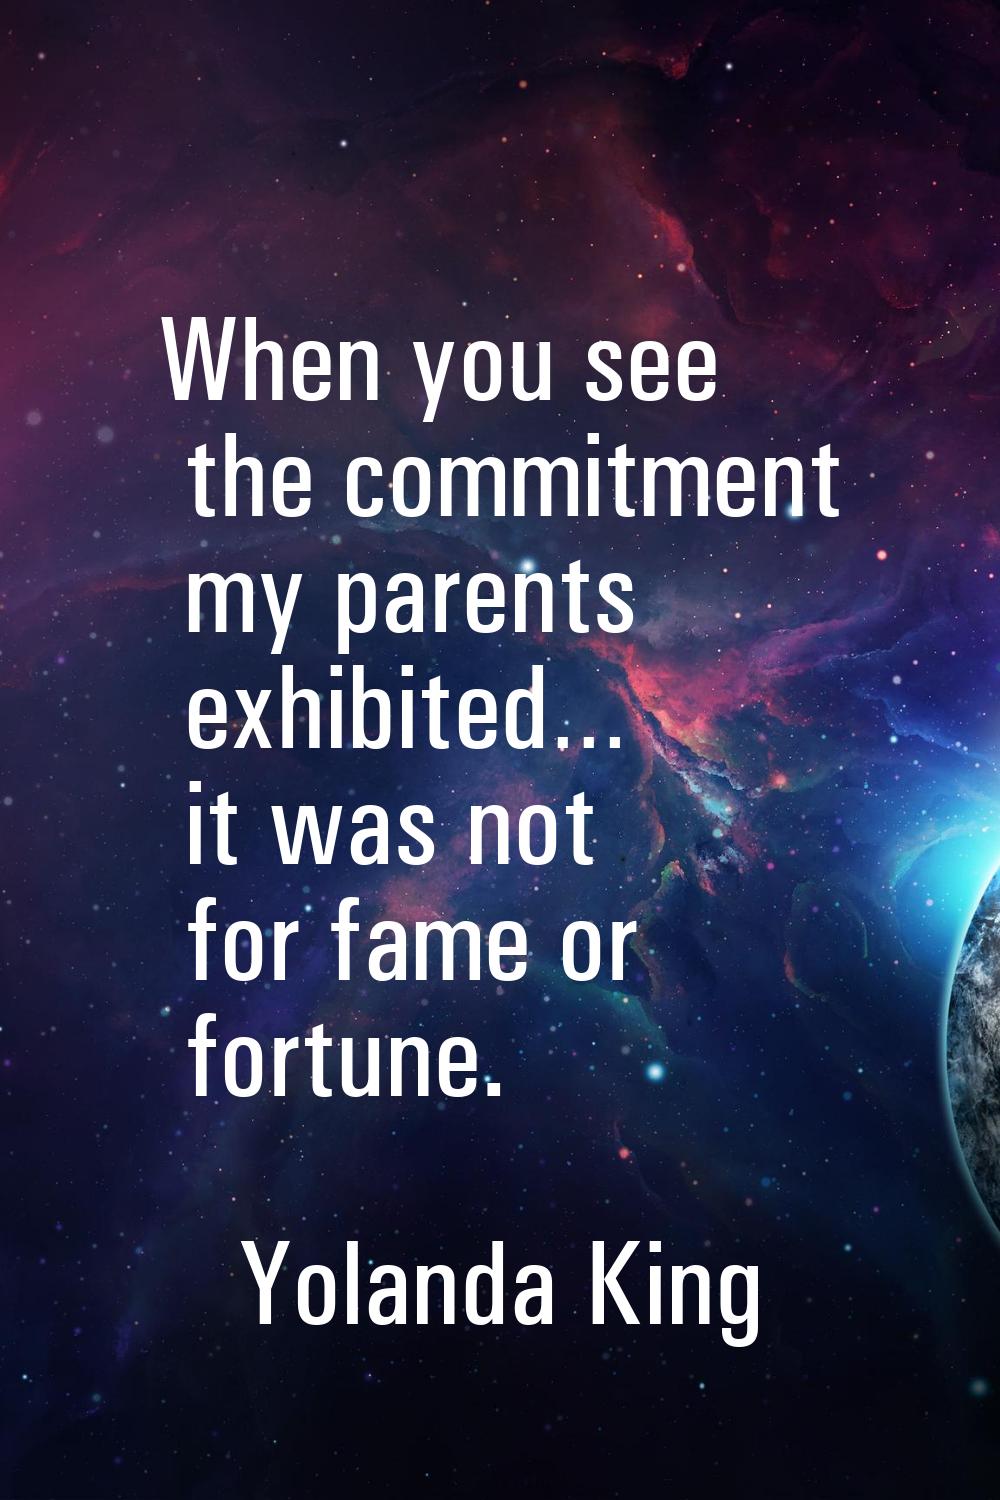 When you see the commitment my parents exhibited… it was not for fame or fortune.